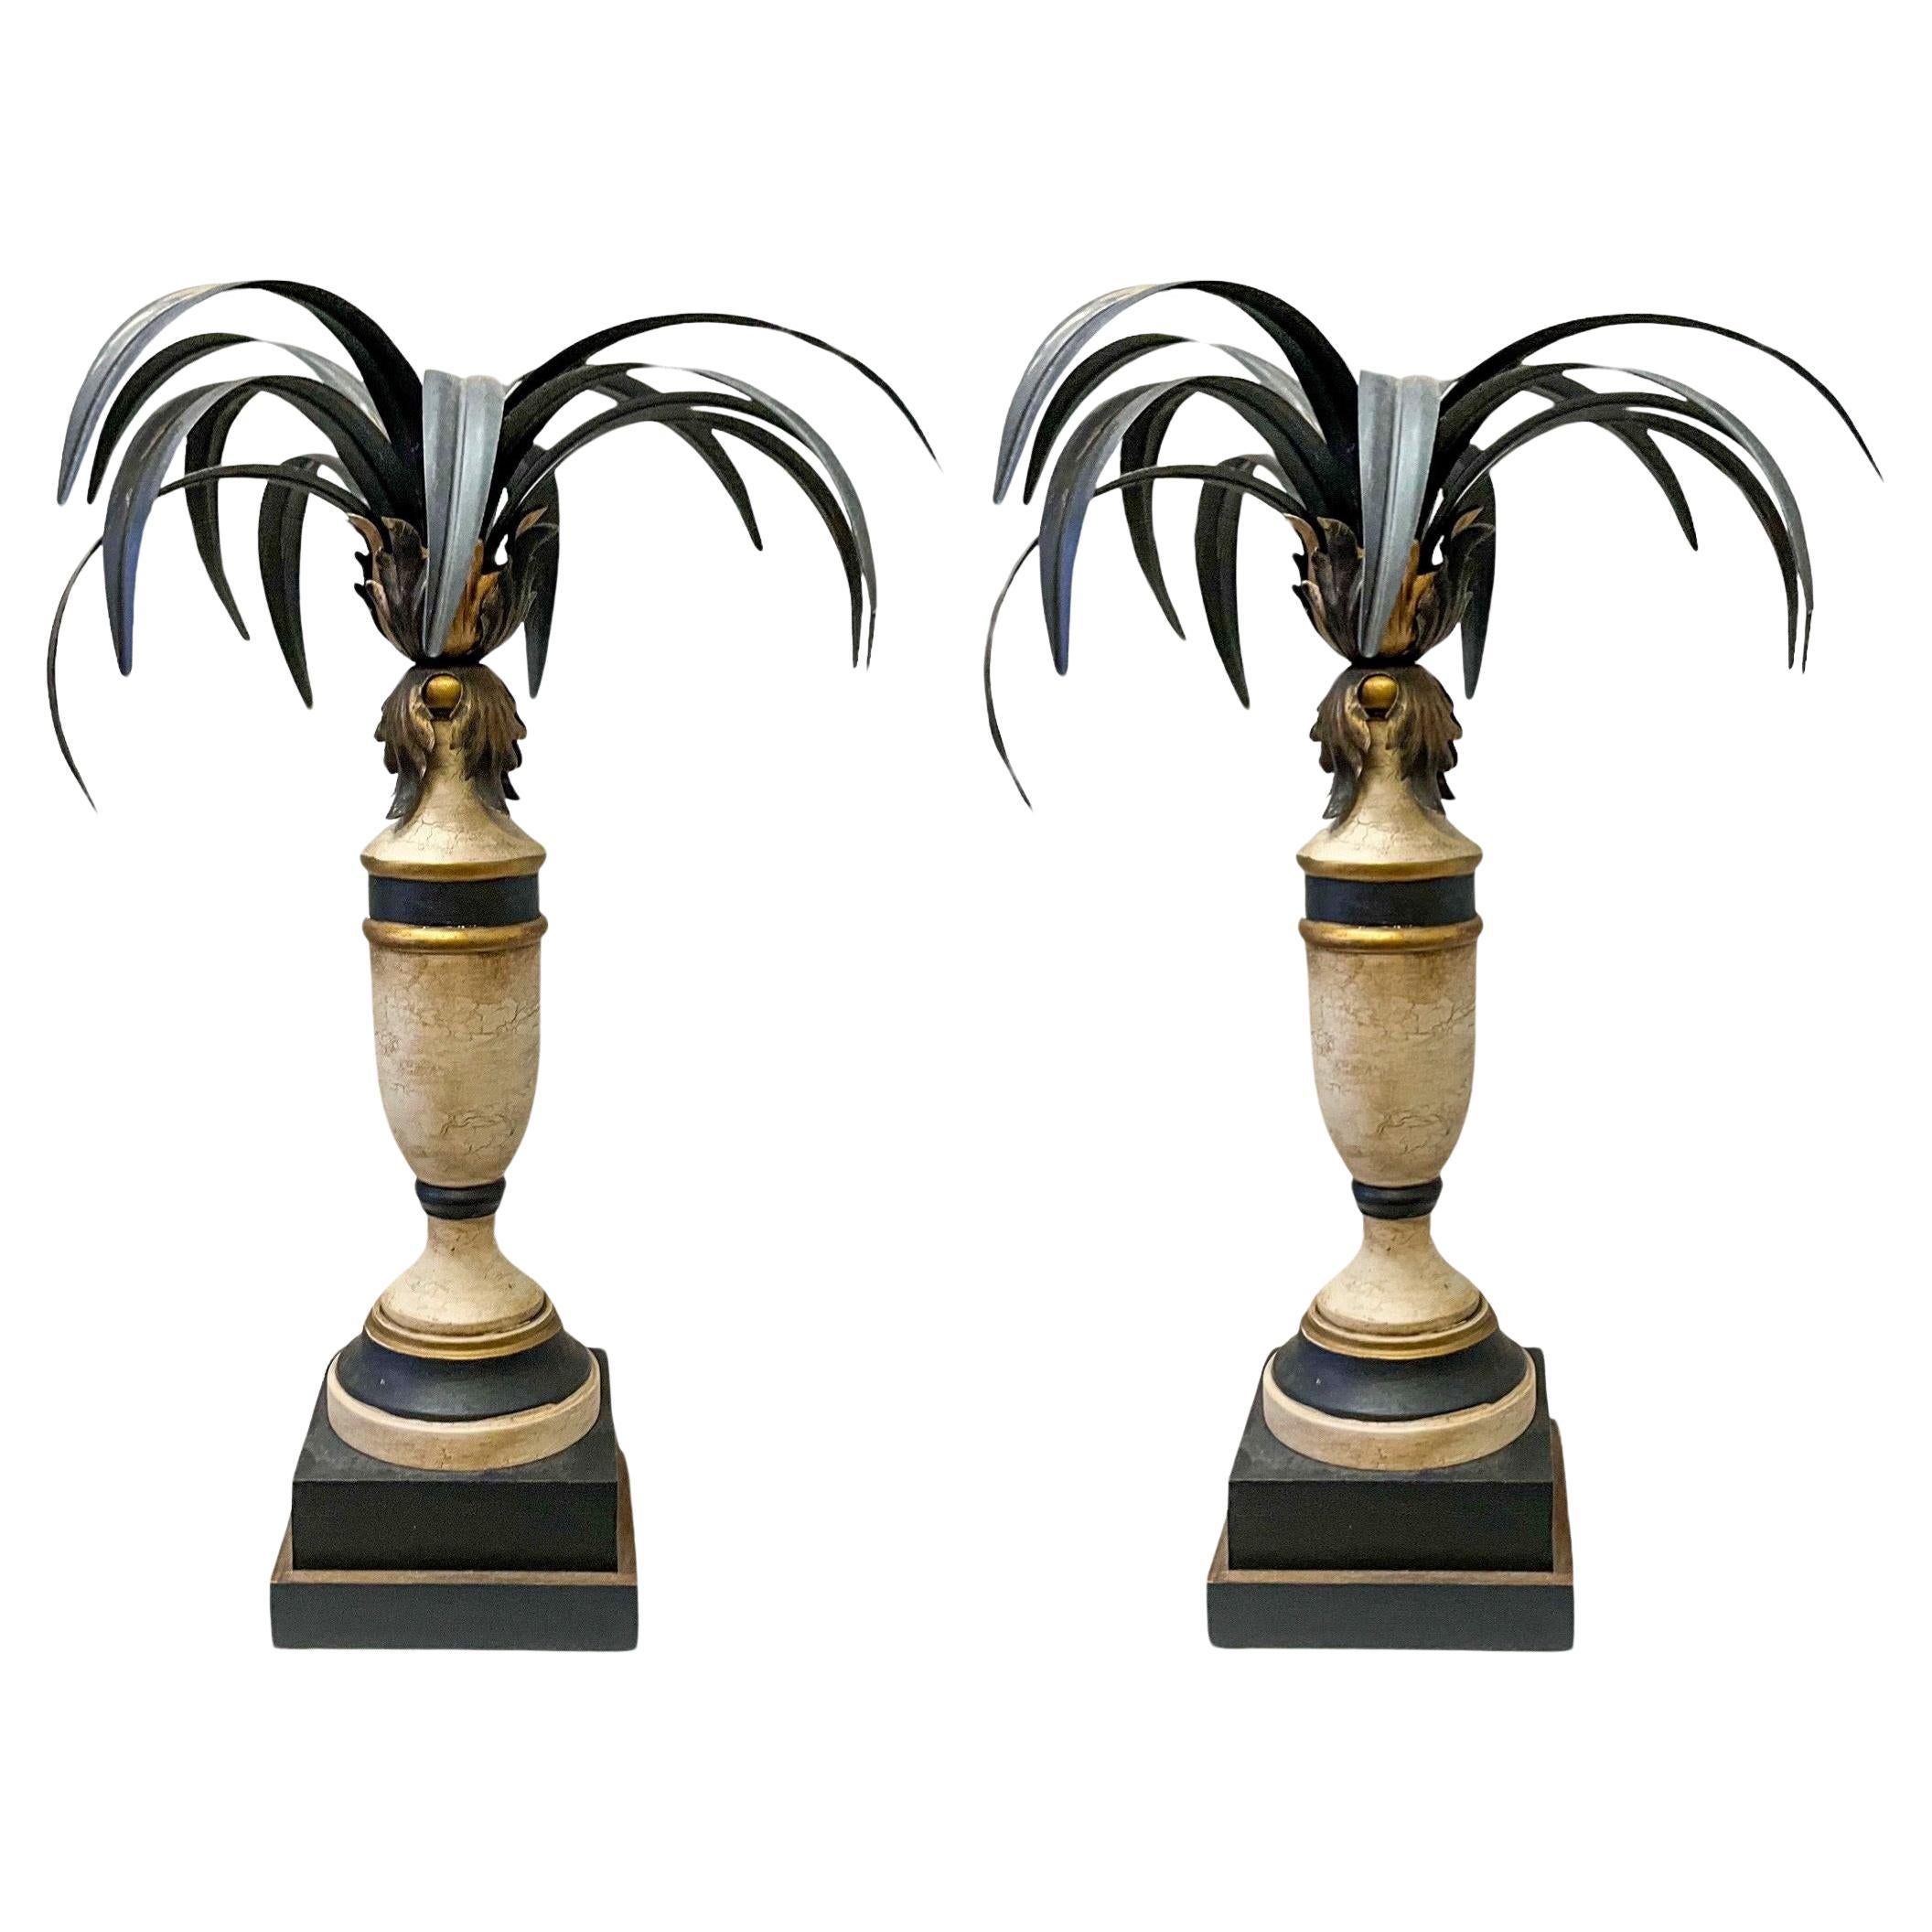 This is pair of regency style Italian candlesticks with tole palm fronds. The stems are carved wood with bases that are 6.25 inches square. They are in very good vintage condition. 